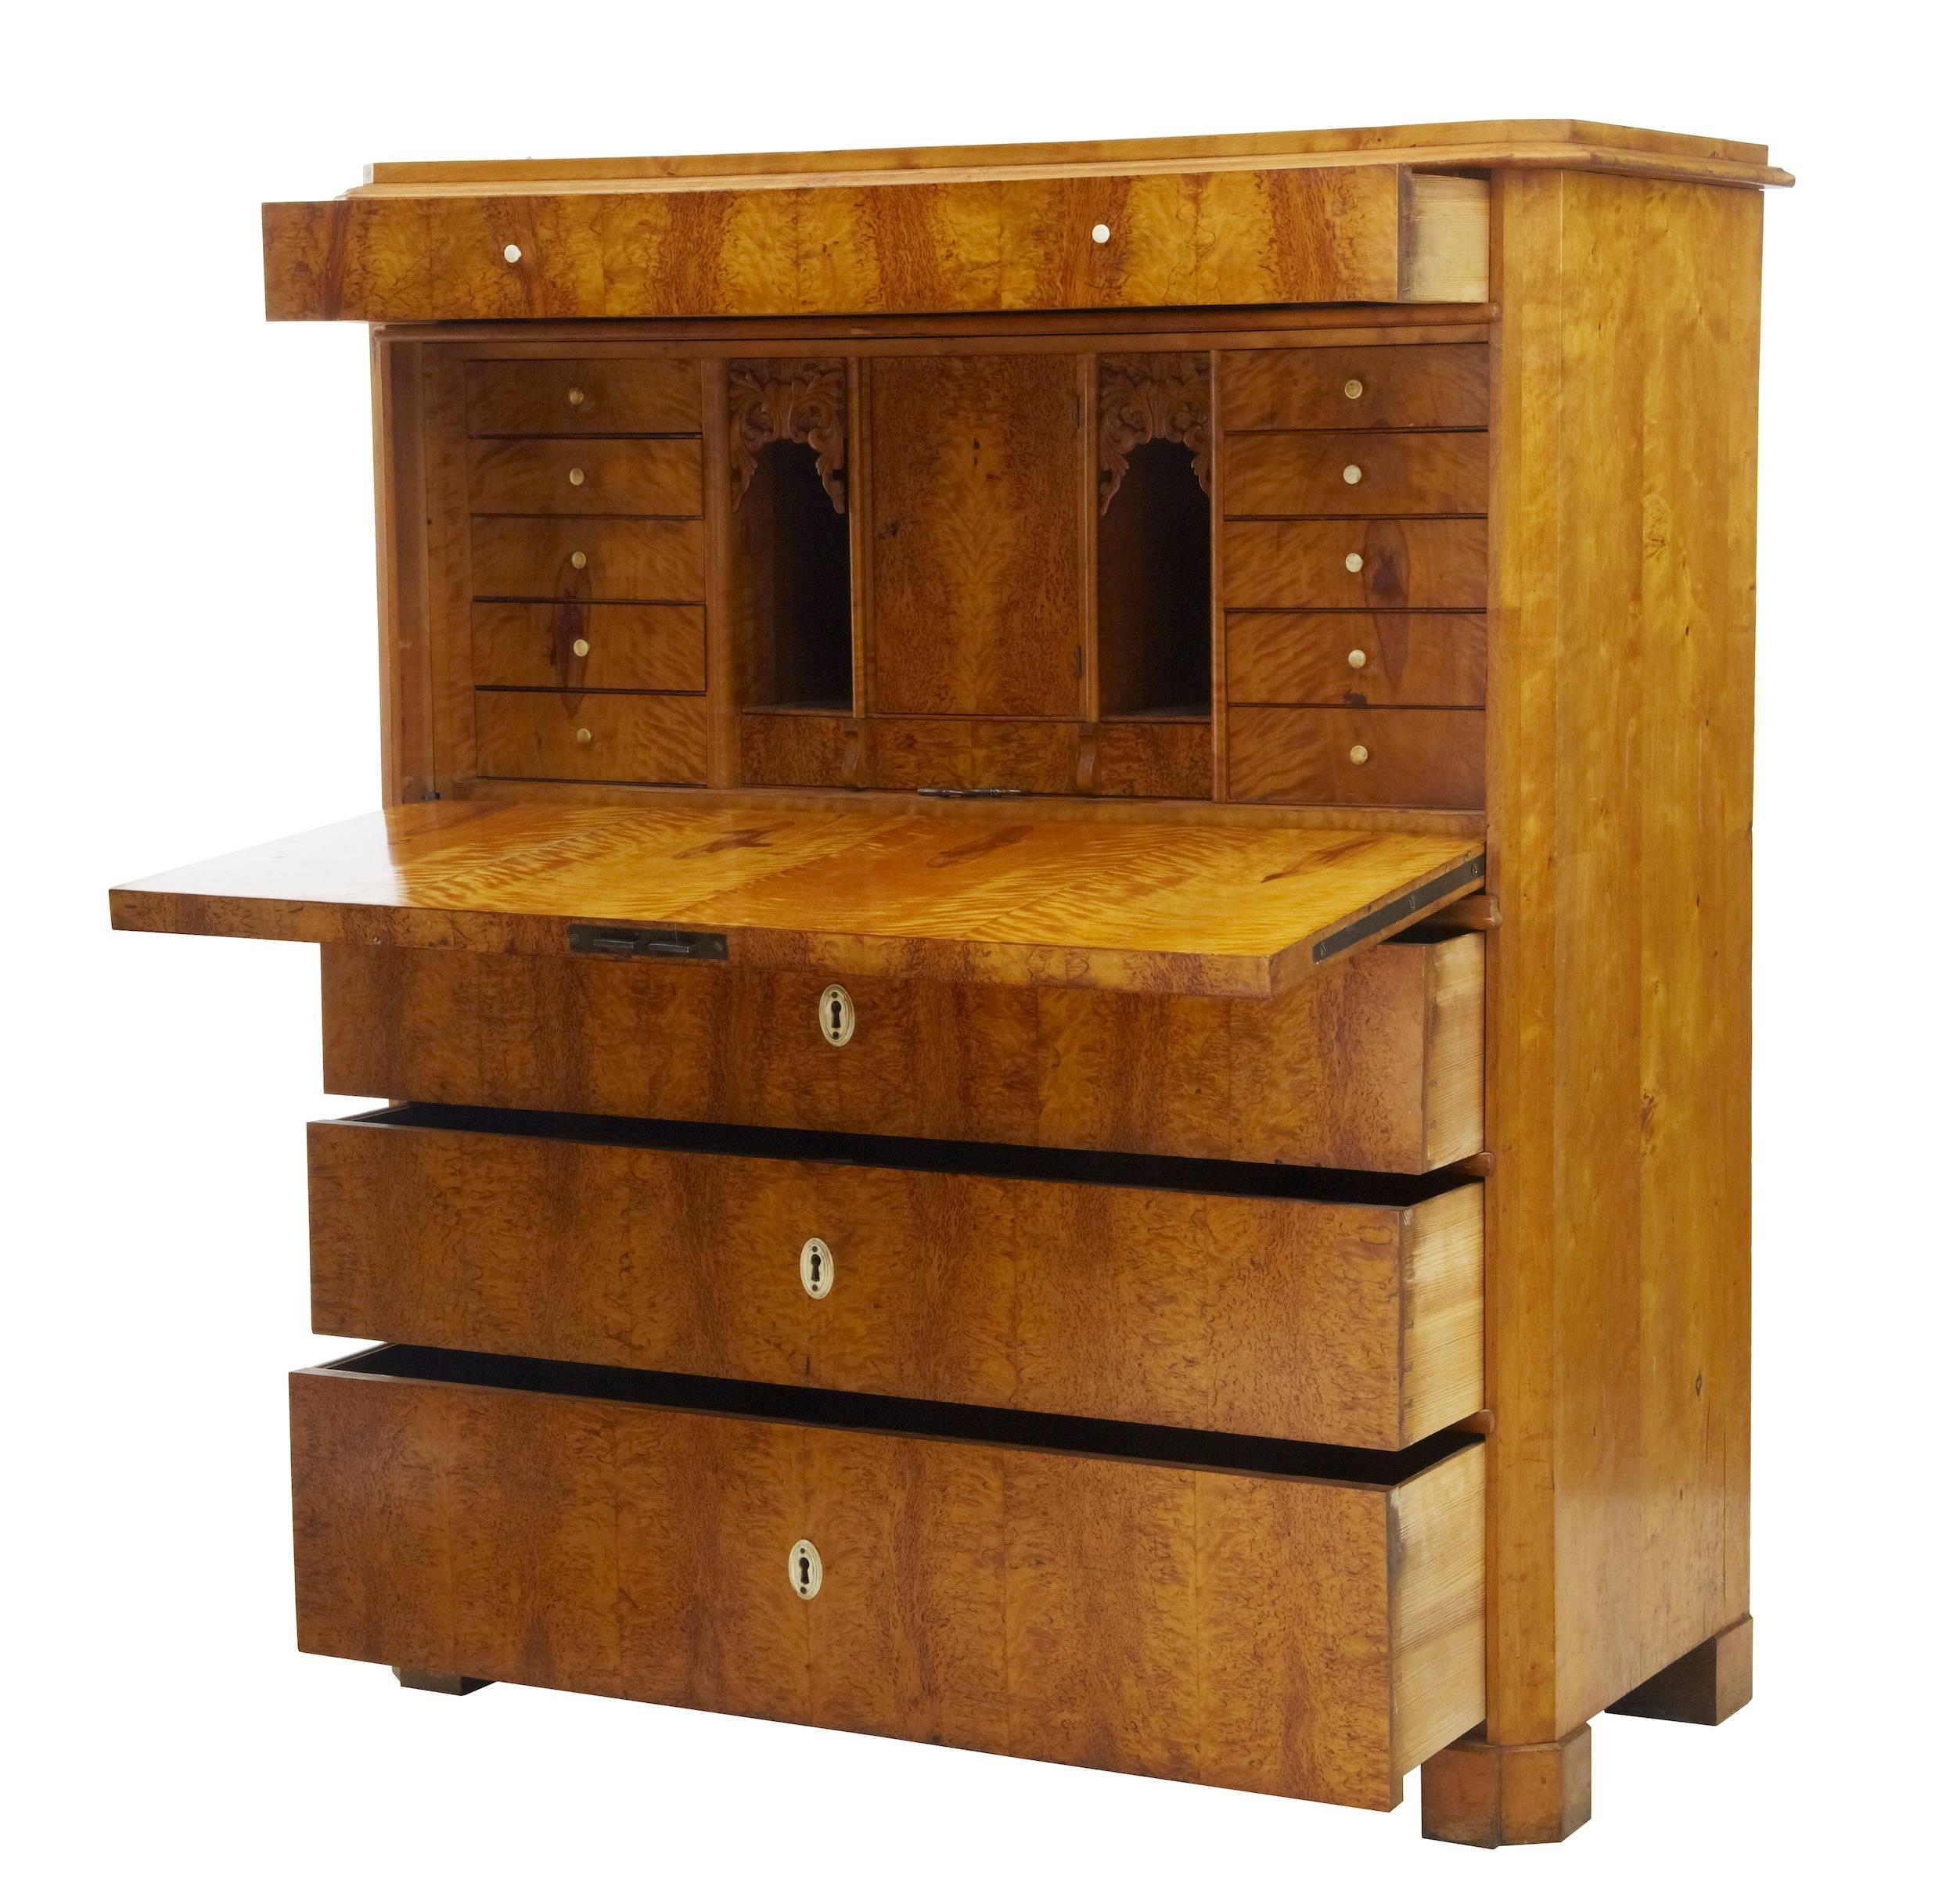 Superb quality burr birch escritoire, circa 1860.
Featuring a single drawer at the top, fall with fully fitted interior, followed by three graduating drawers.
Fall creates the writing surface when down. Interior with central tabernacle and carved